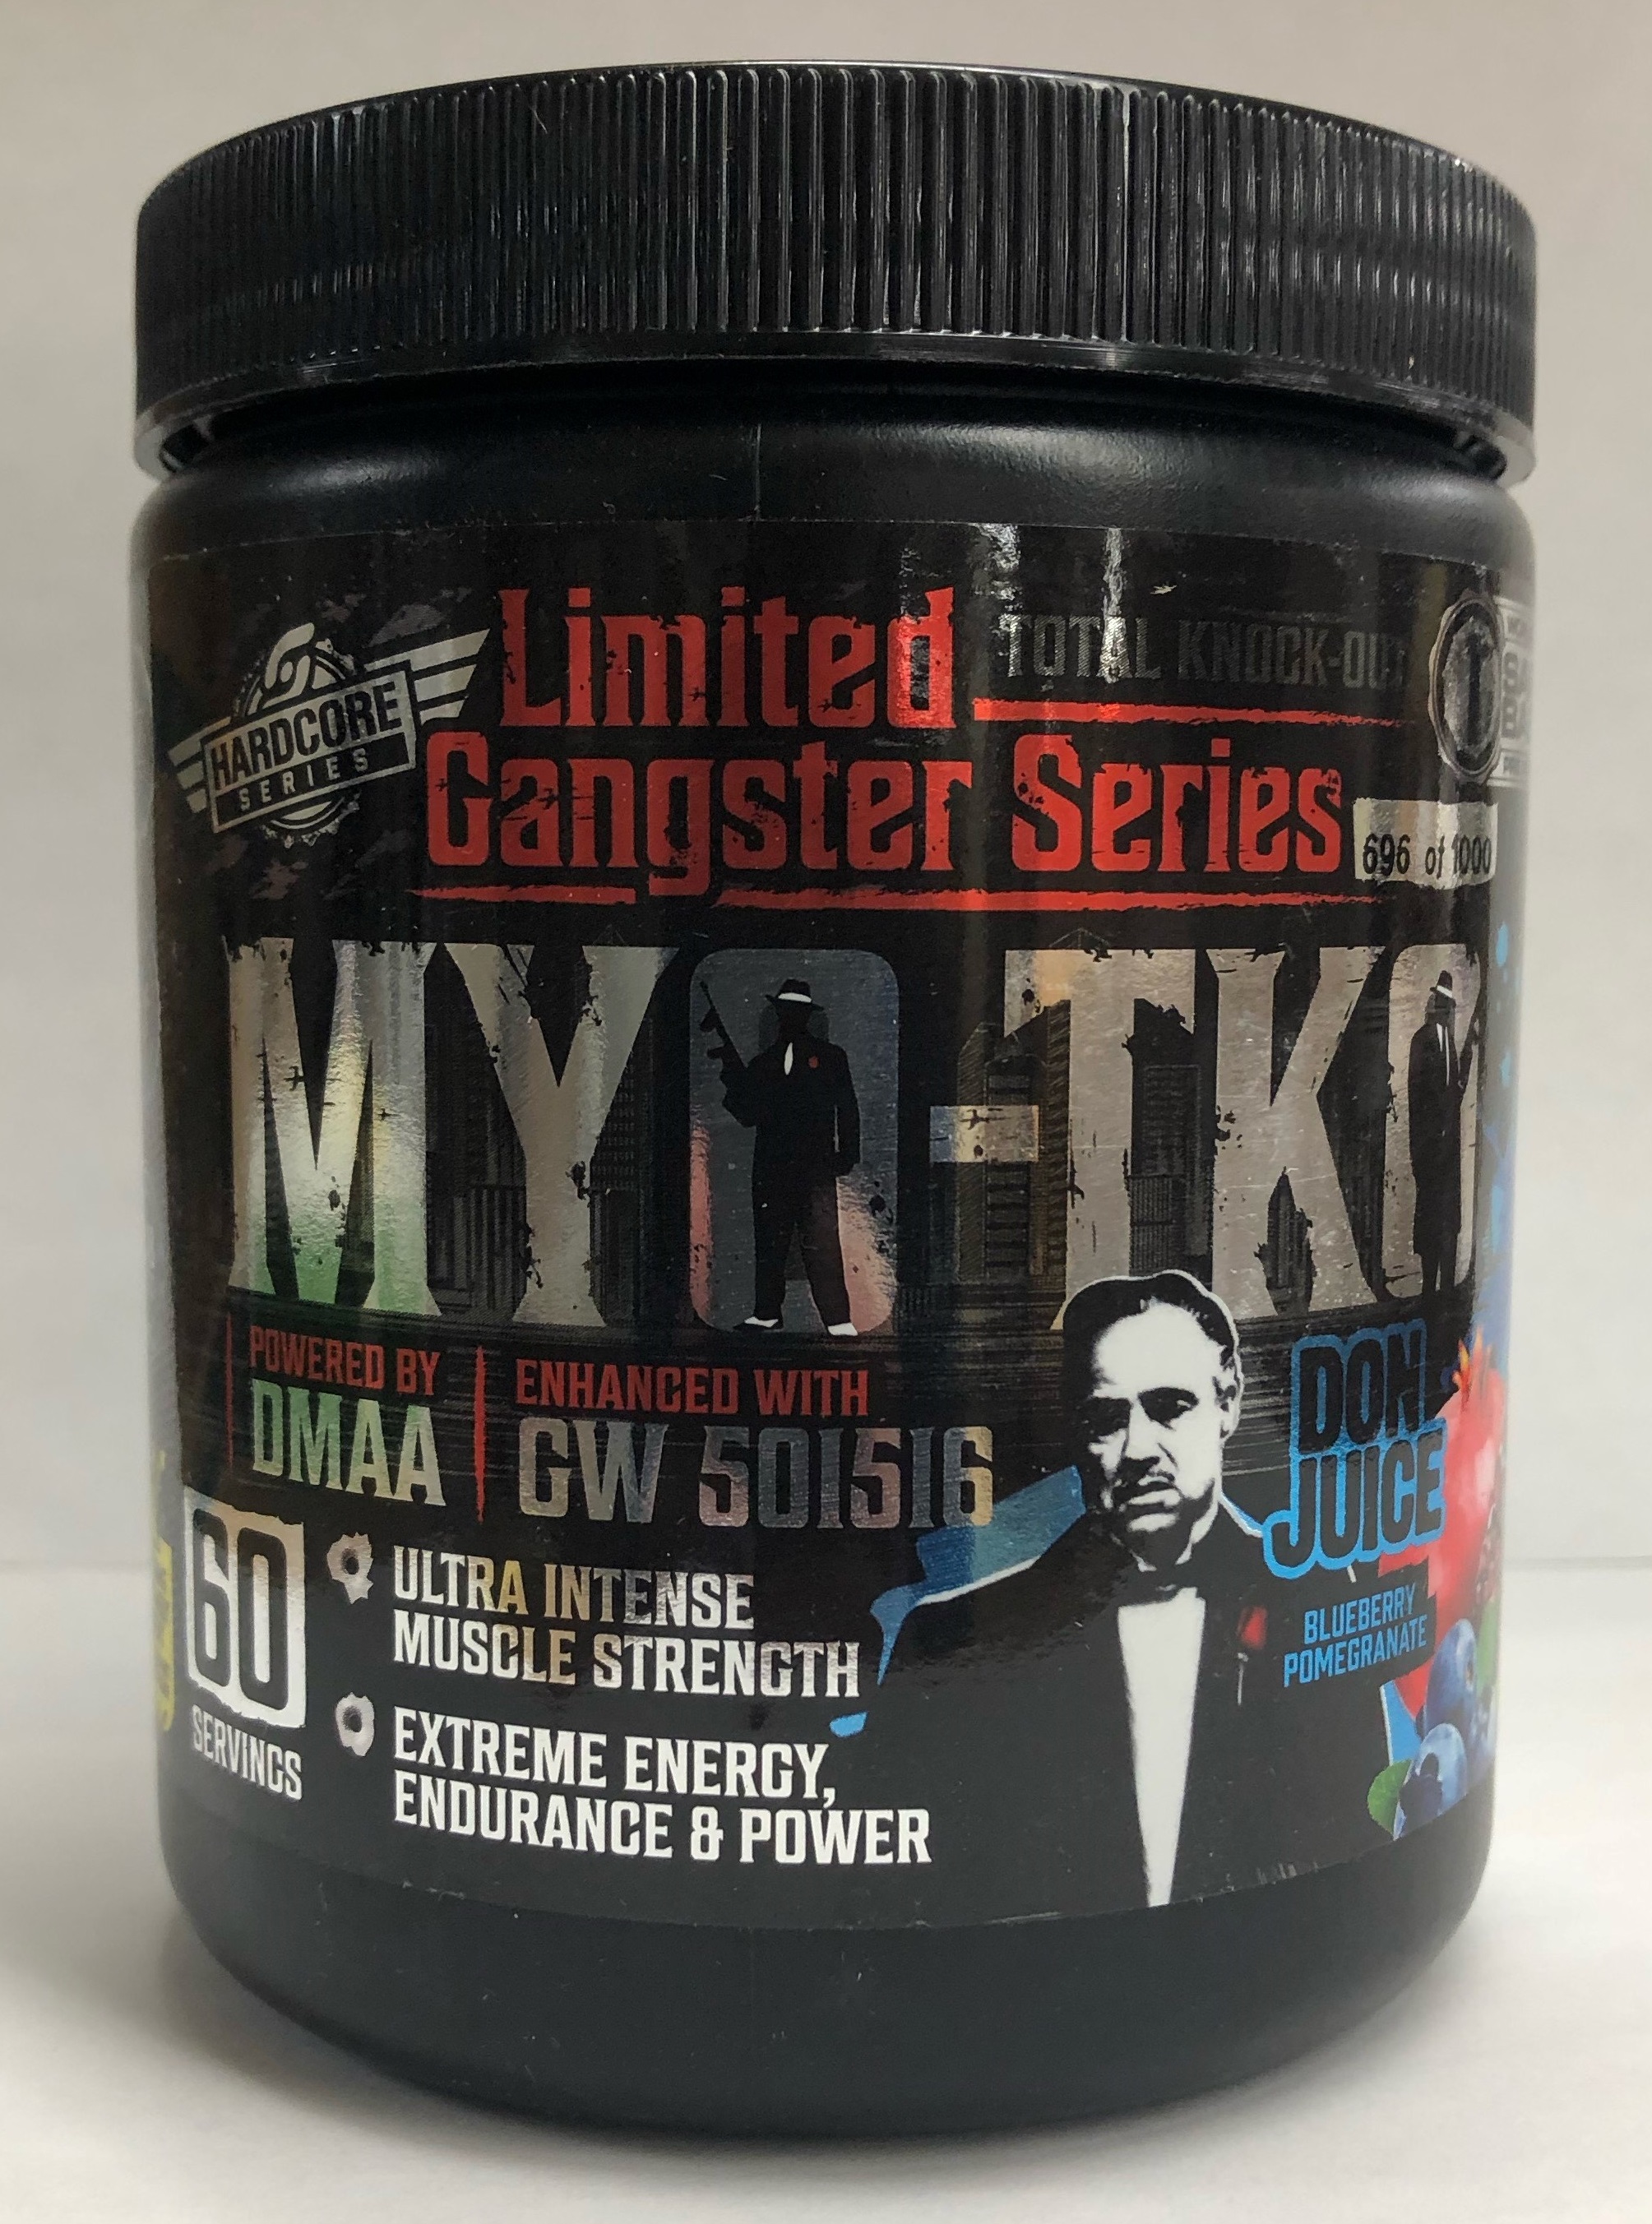 Limited Gangster Series Myo-TKO, Blueberry Pomegranate